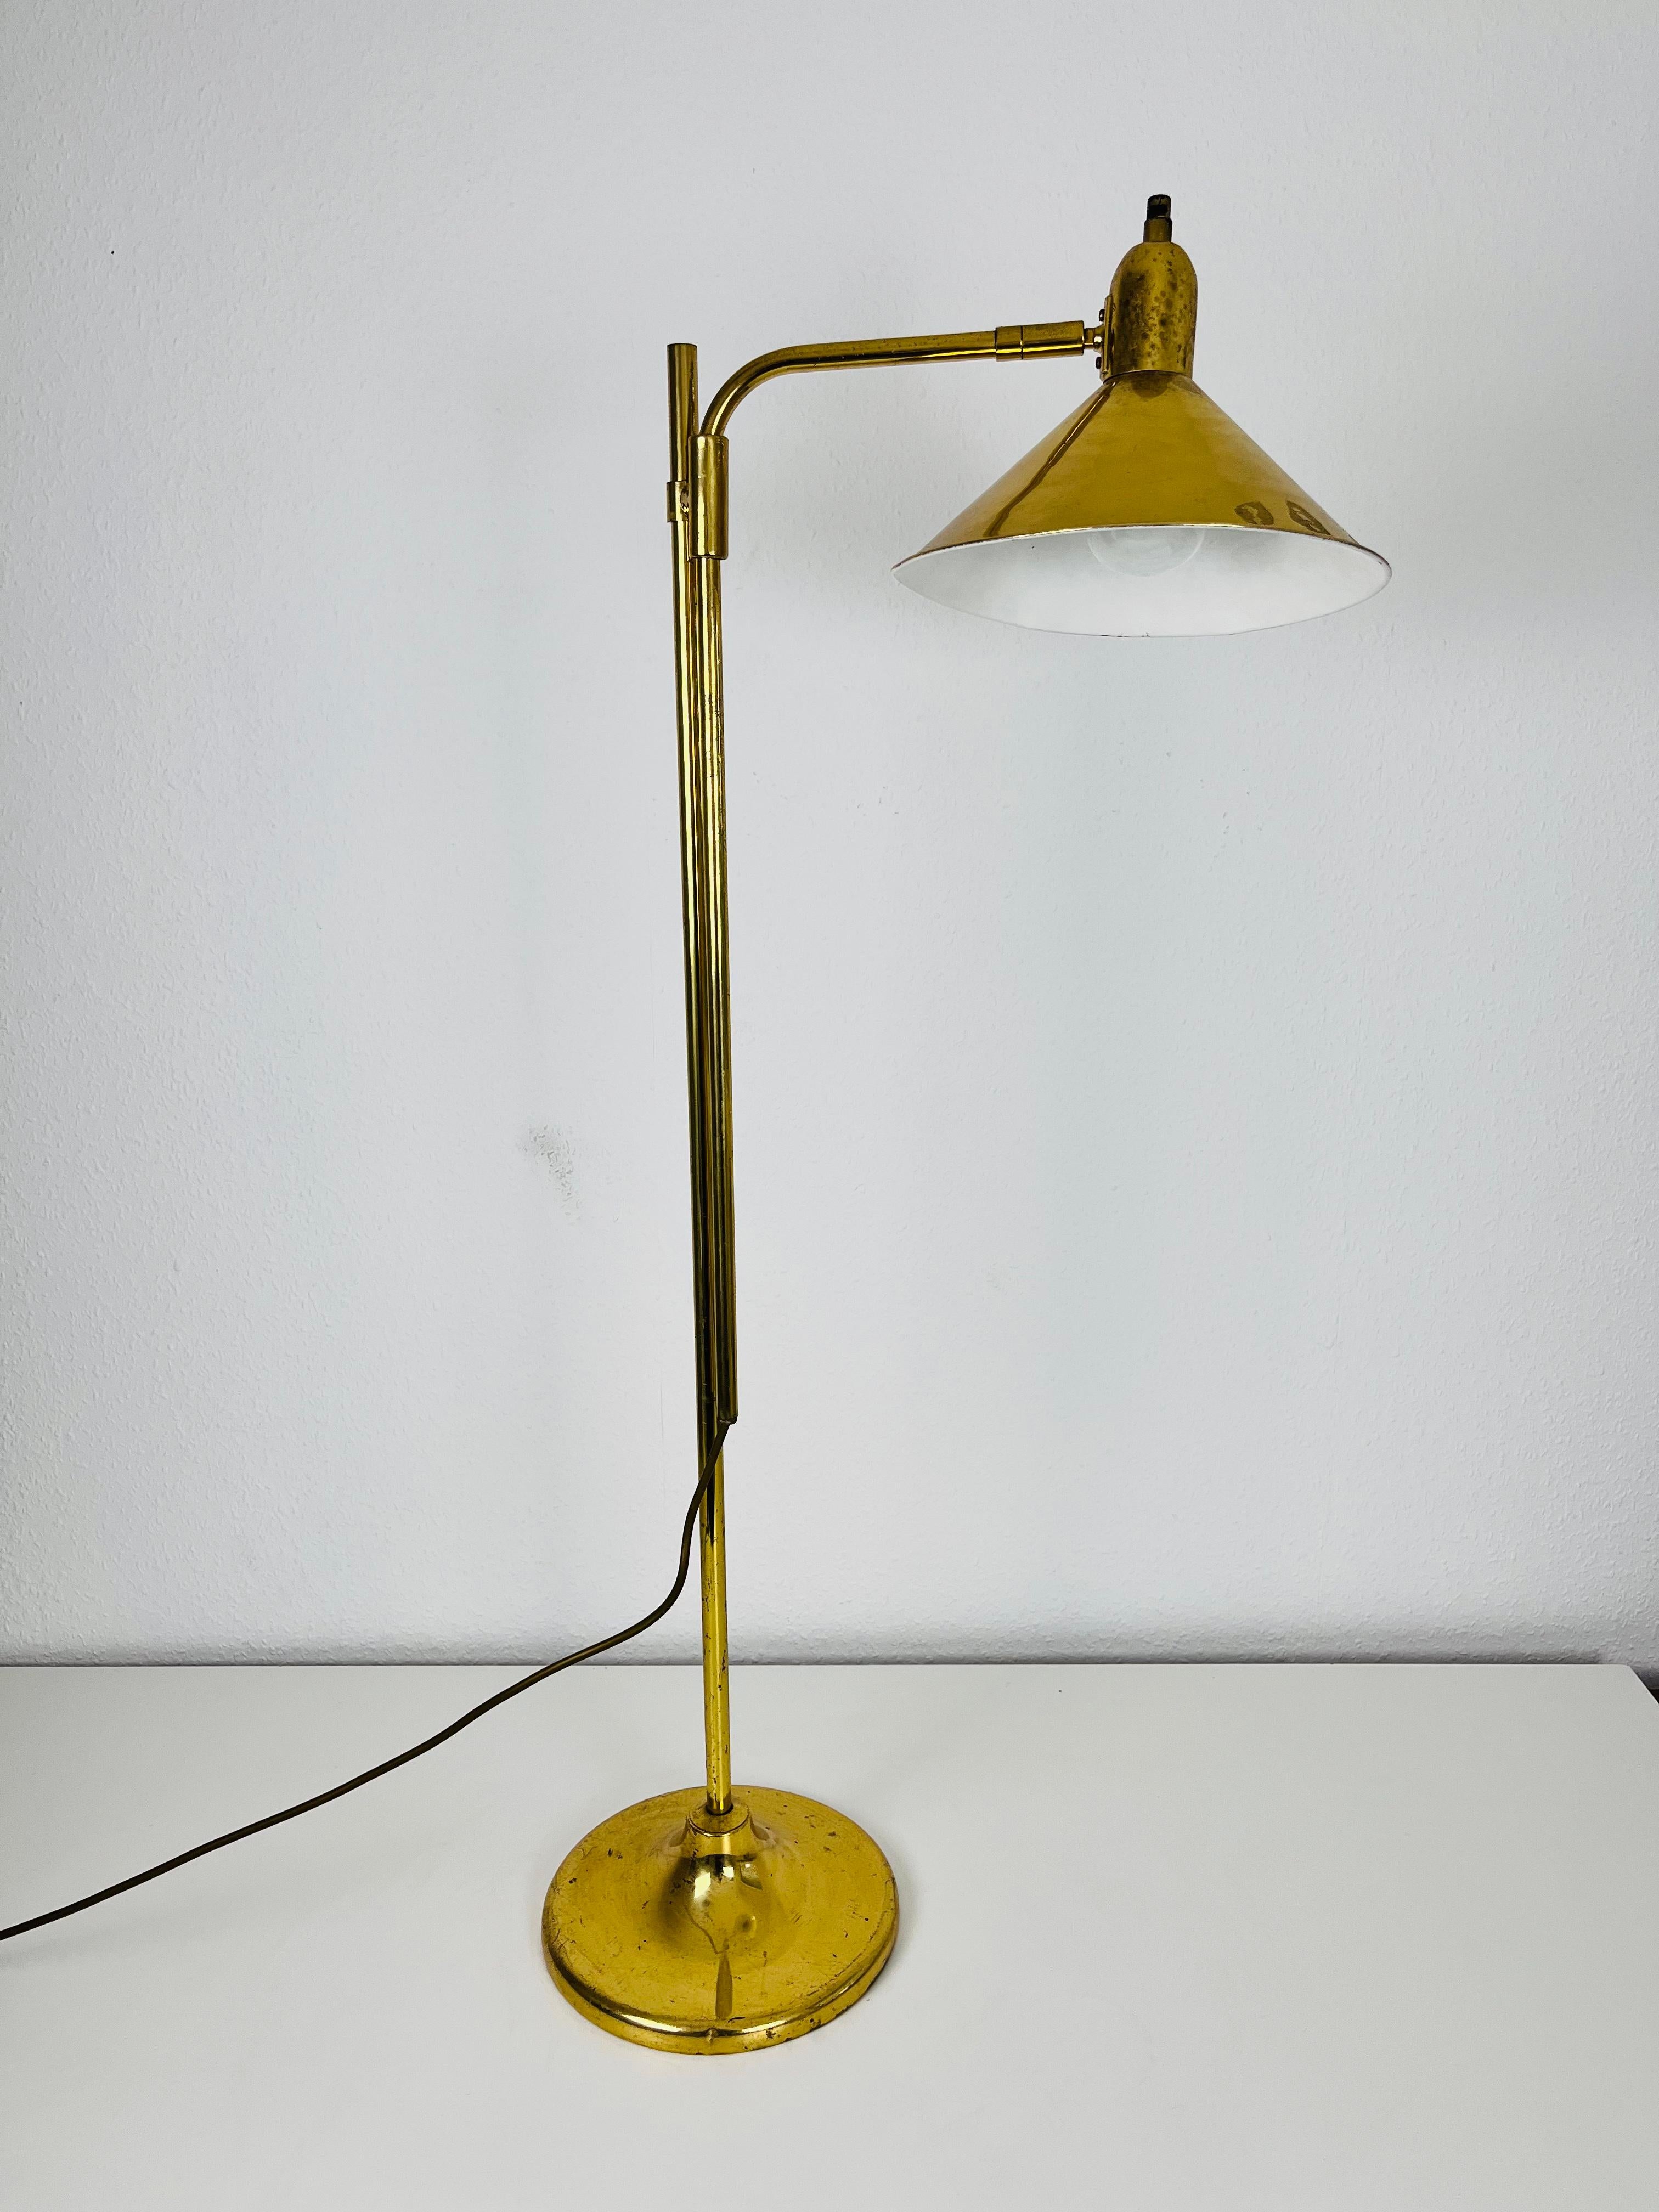 A brass floor lamp made in Germany in the 1970s. It is fascinating with its adjustable bar. The light is made of full brass, including the shade.

Measurements:
Height: 100-140 cm
Width: 24 cm
Depth: 35 cm

The light requires one E27 light